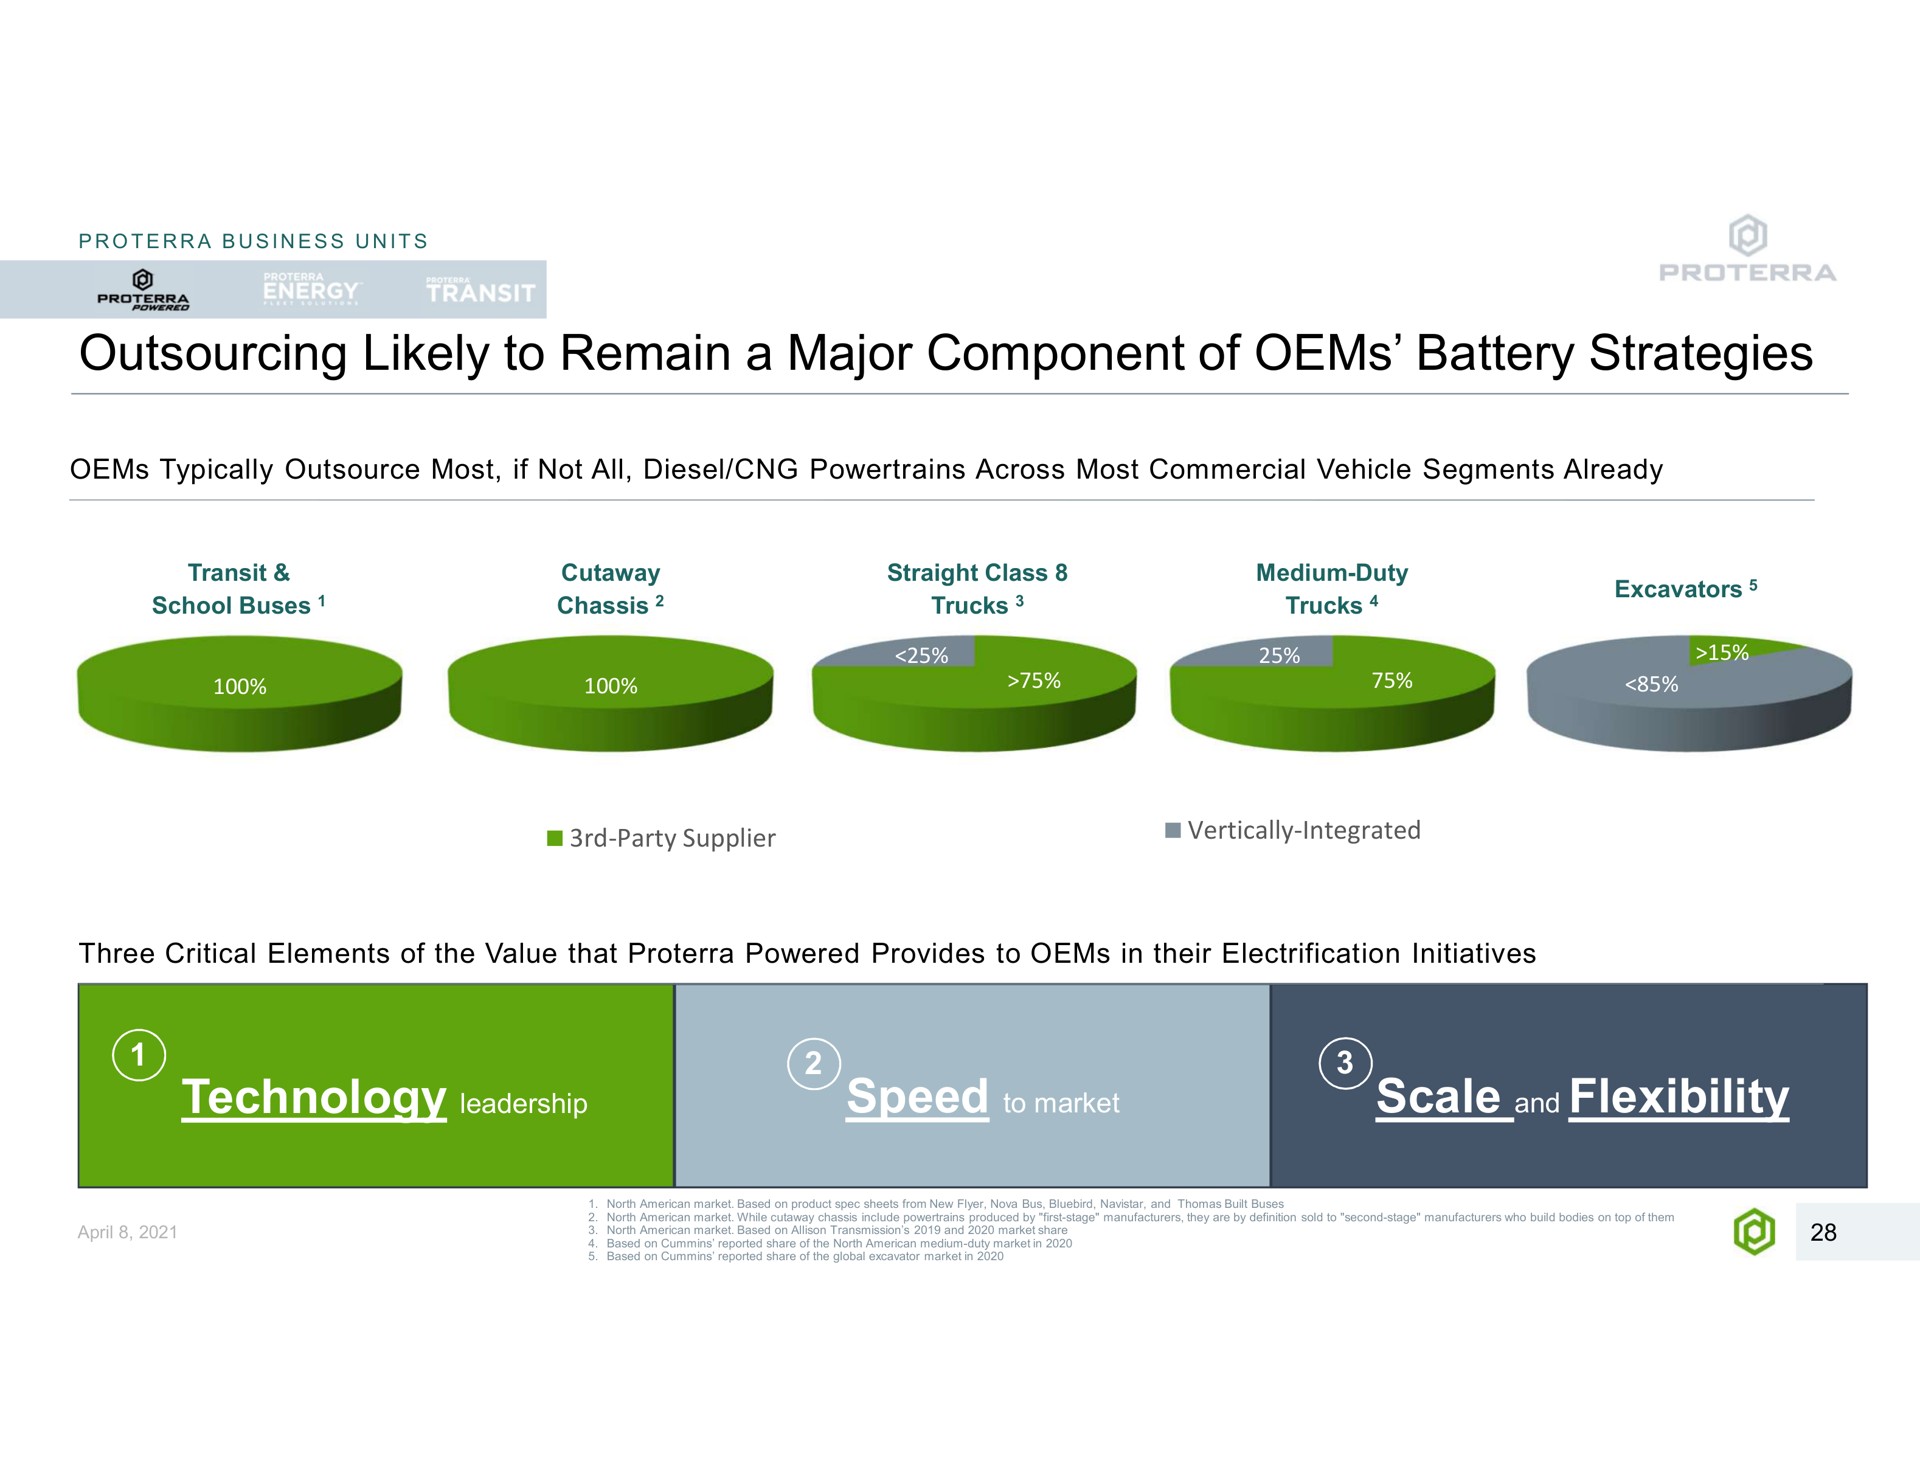 likely to remain a major component of battery strategies technology leadership scale and flexibility business units powered typically most if not all diesel across most commercial vehicle segments already transit school buses cutaway chassis straight class trucks medium duty excavators phew trucks are party supplier vertically integrated three critical elements the value that powered provides in their electrification initiatives tech north market based on product spec sheets from new flyer nova bus bluebird north market while cutaway chassis include produced by first stage manufacturers they are by definition sold second stage manufacturers who build bodies on top them north market based on transmission market share based on reported share the north medium duty market in based on reported share the global excavator market in built buses | Proterra